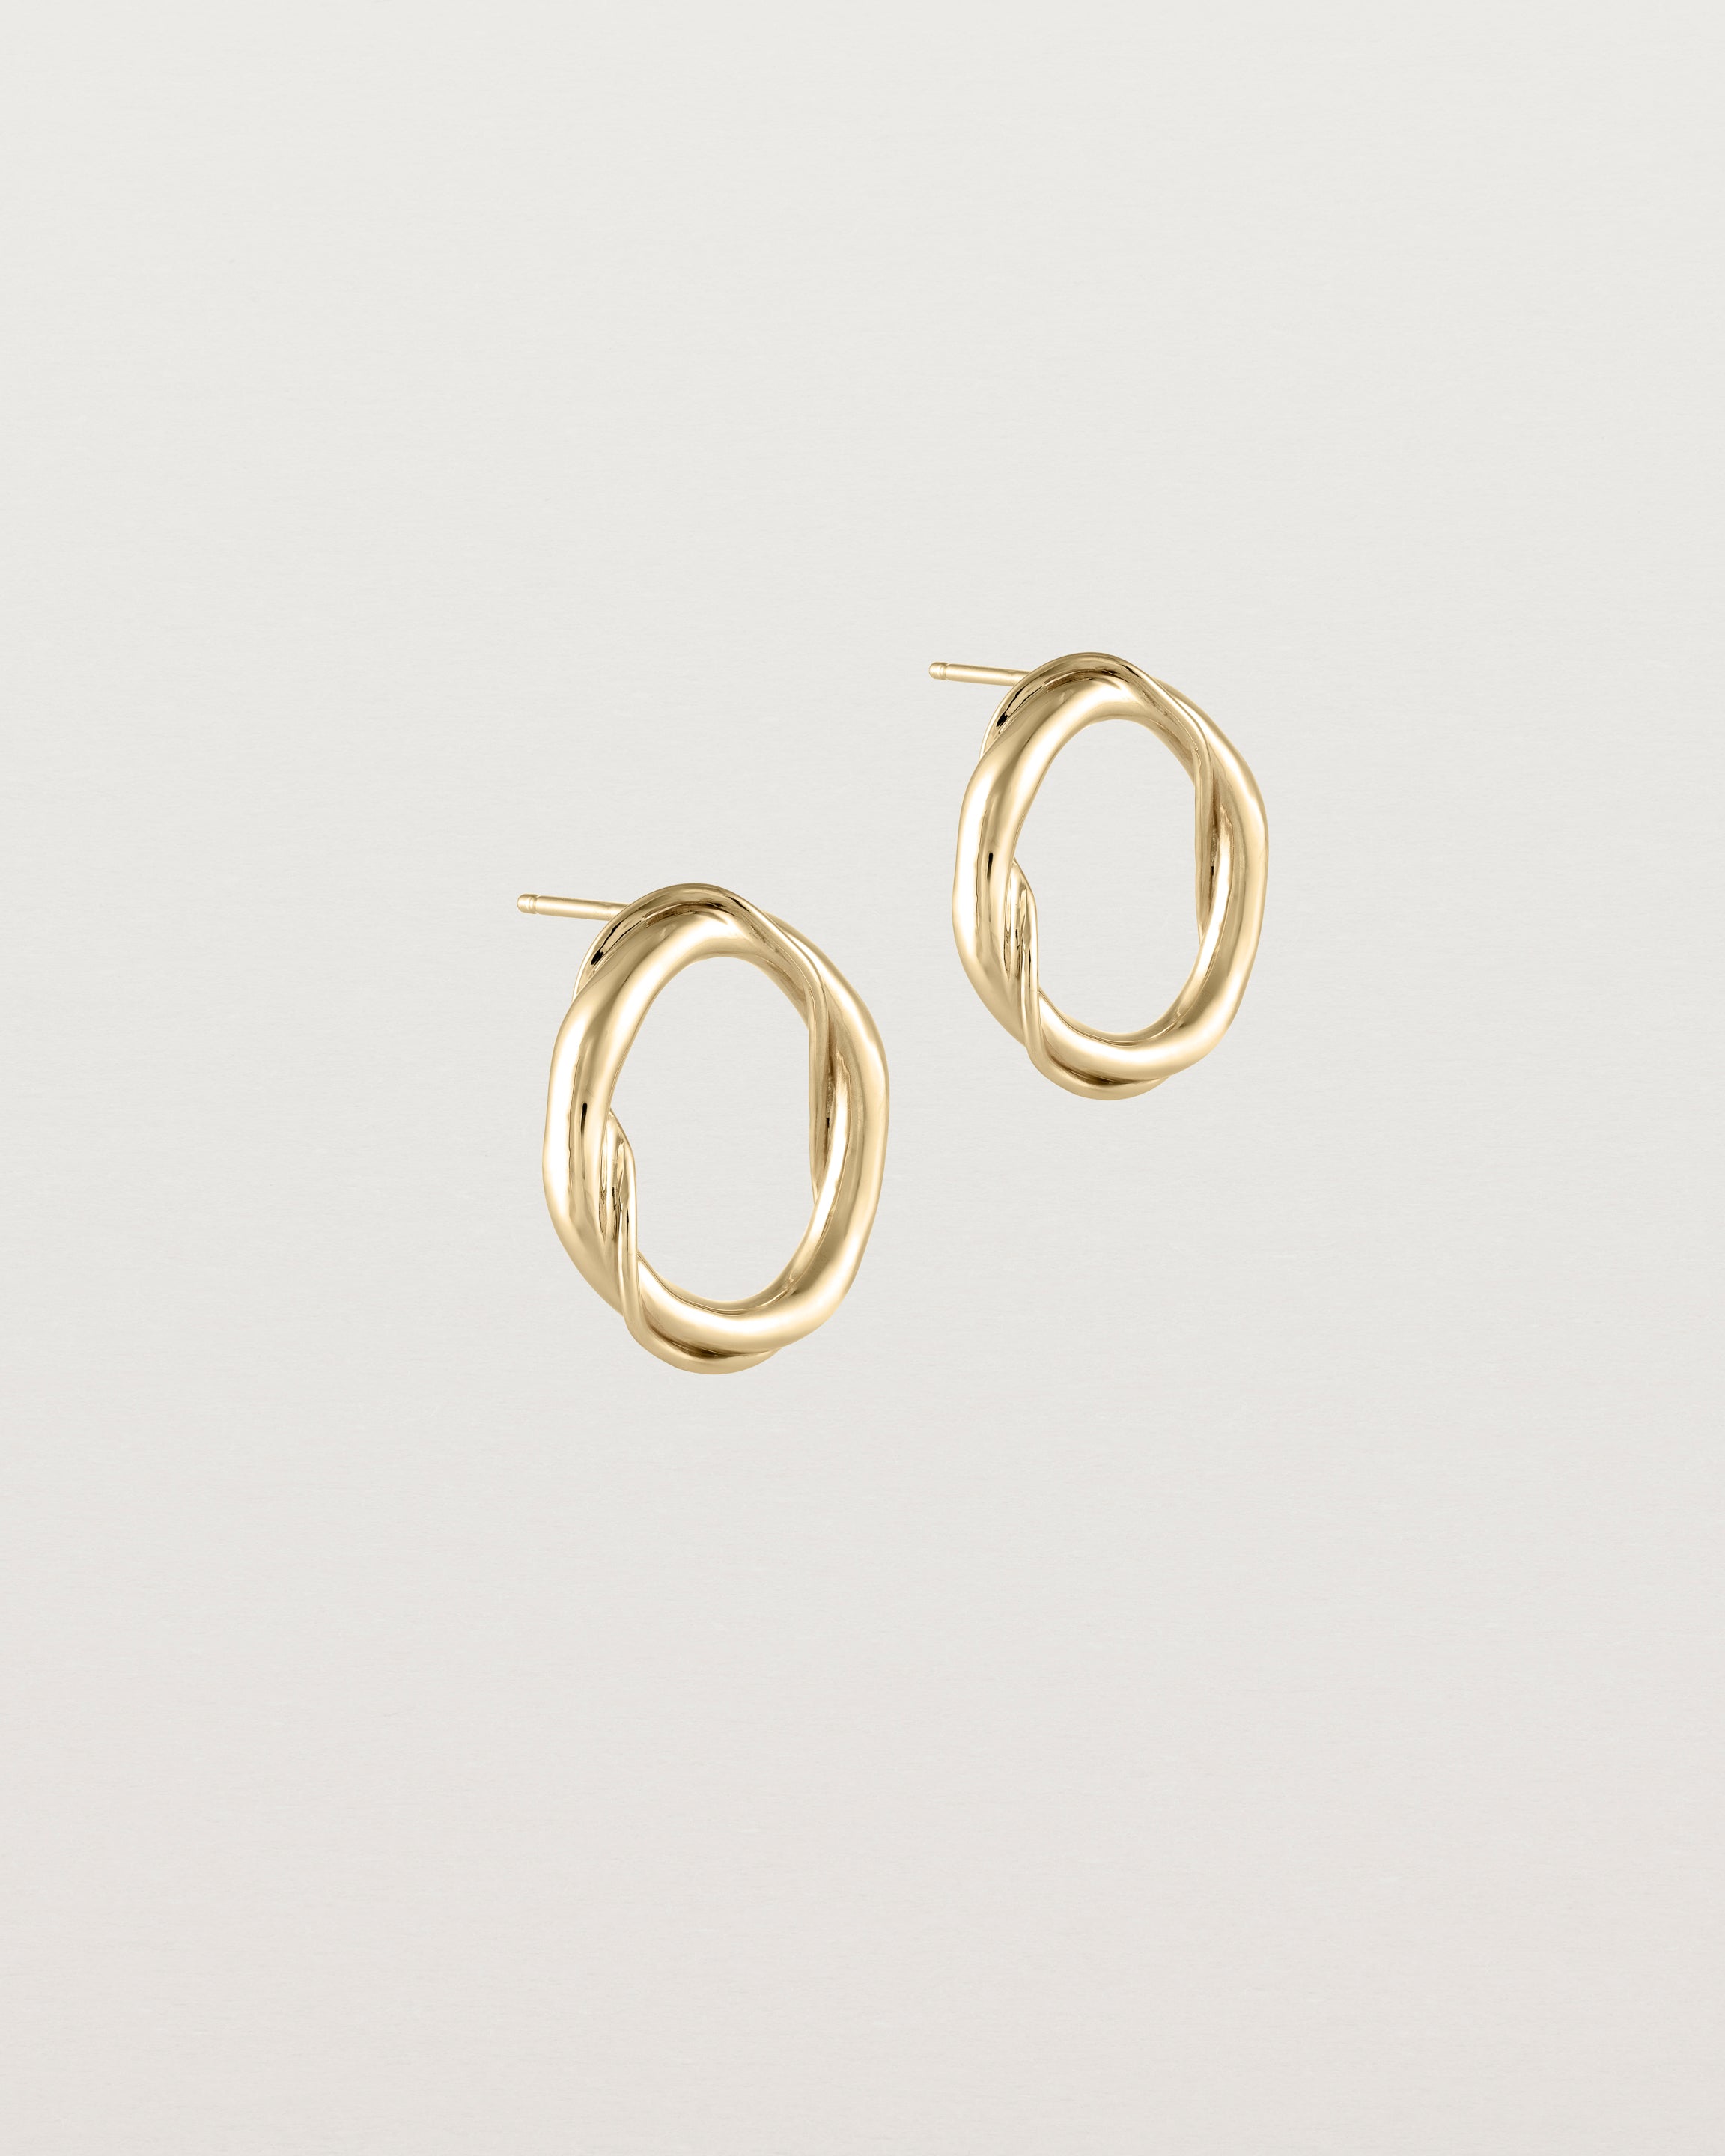 Angled view of the Petite Dalí Earrings in yellow gold.